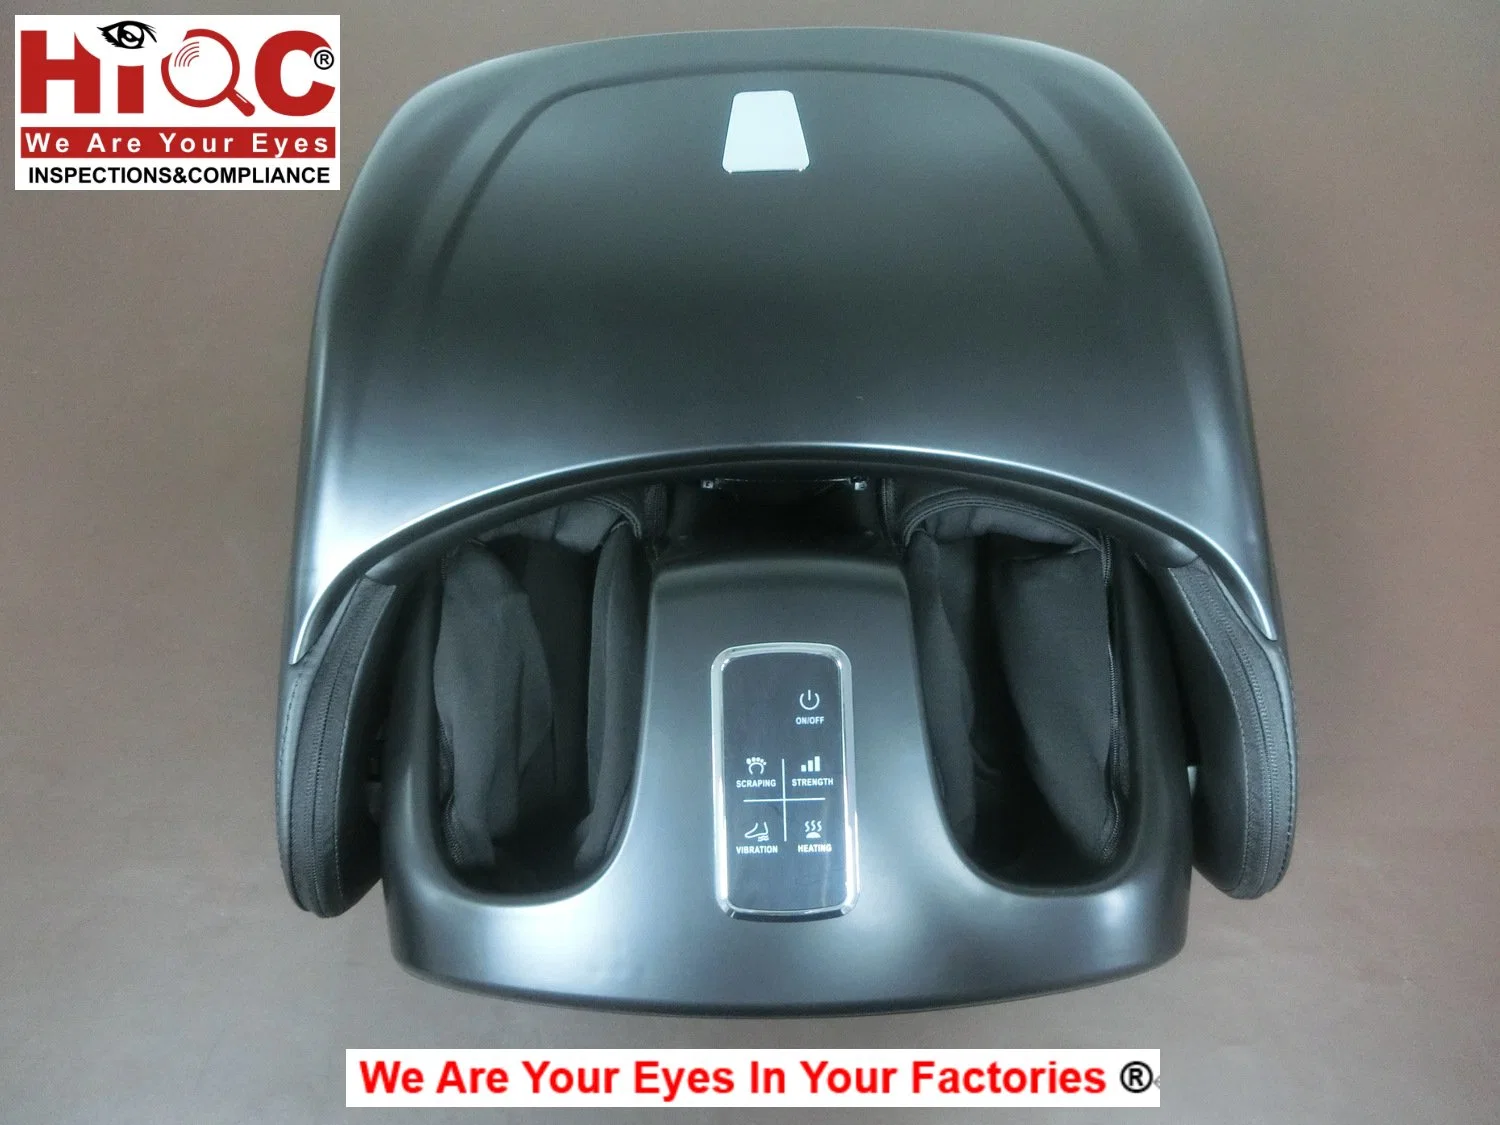 Foot Massager Inspection/Third Party Inspection Service/Product Inspection/Quality Control Inspection